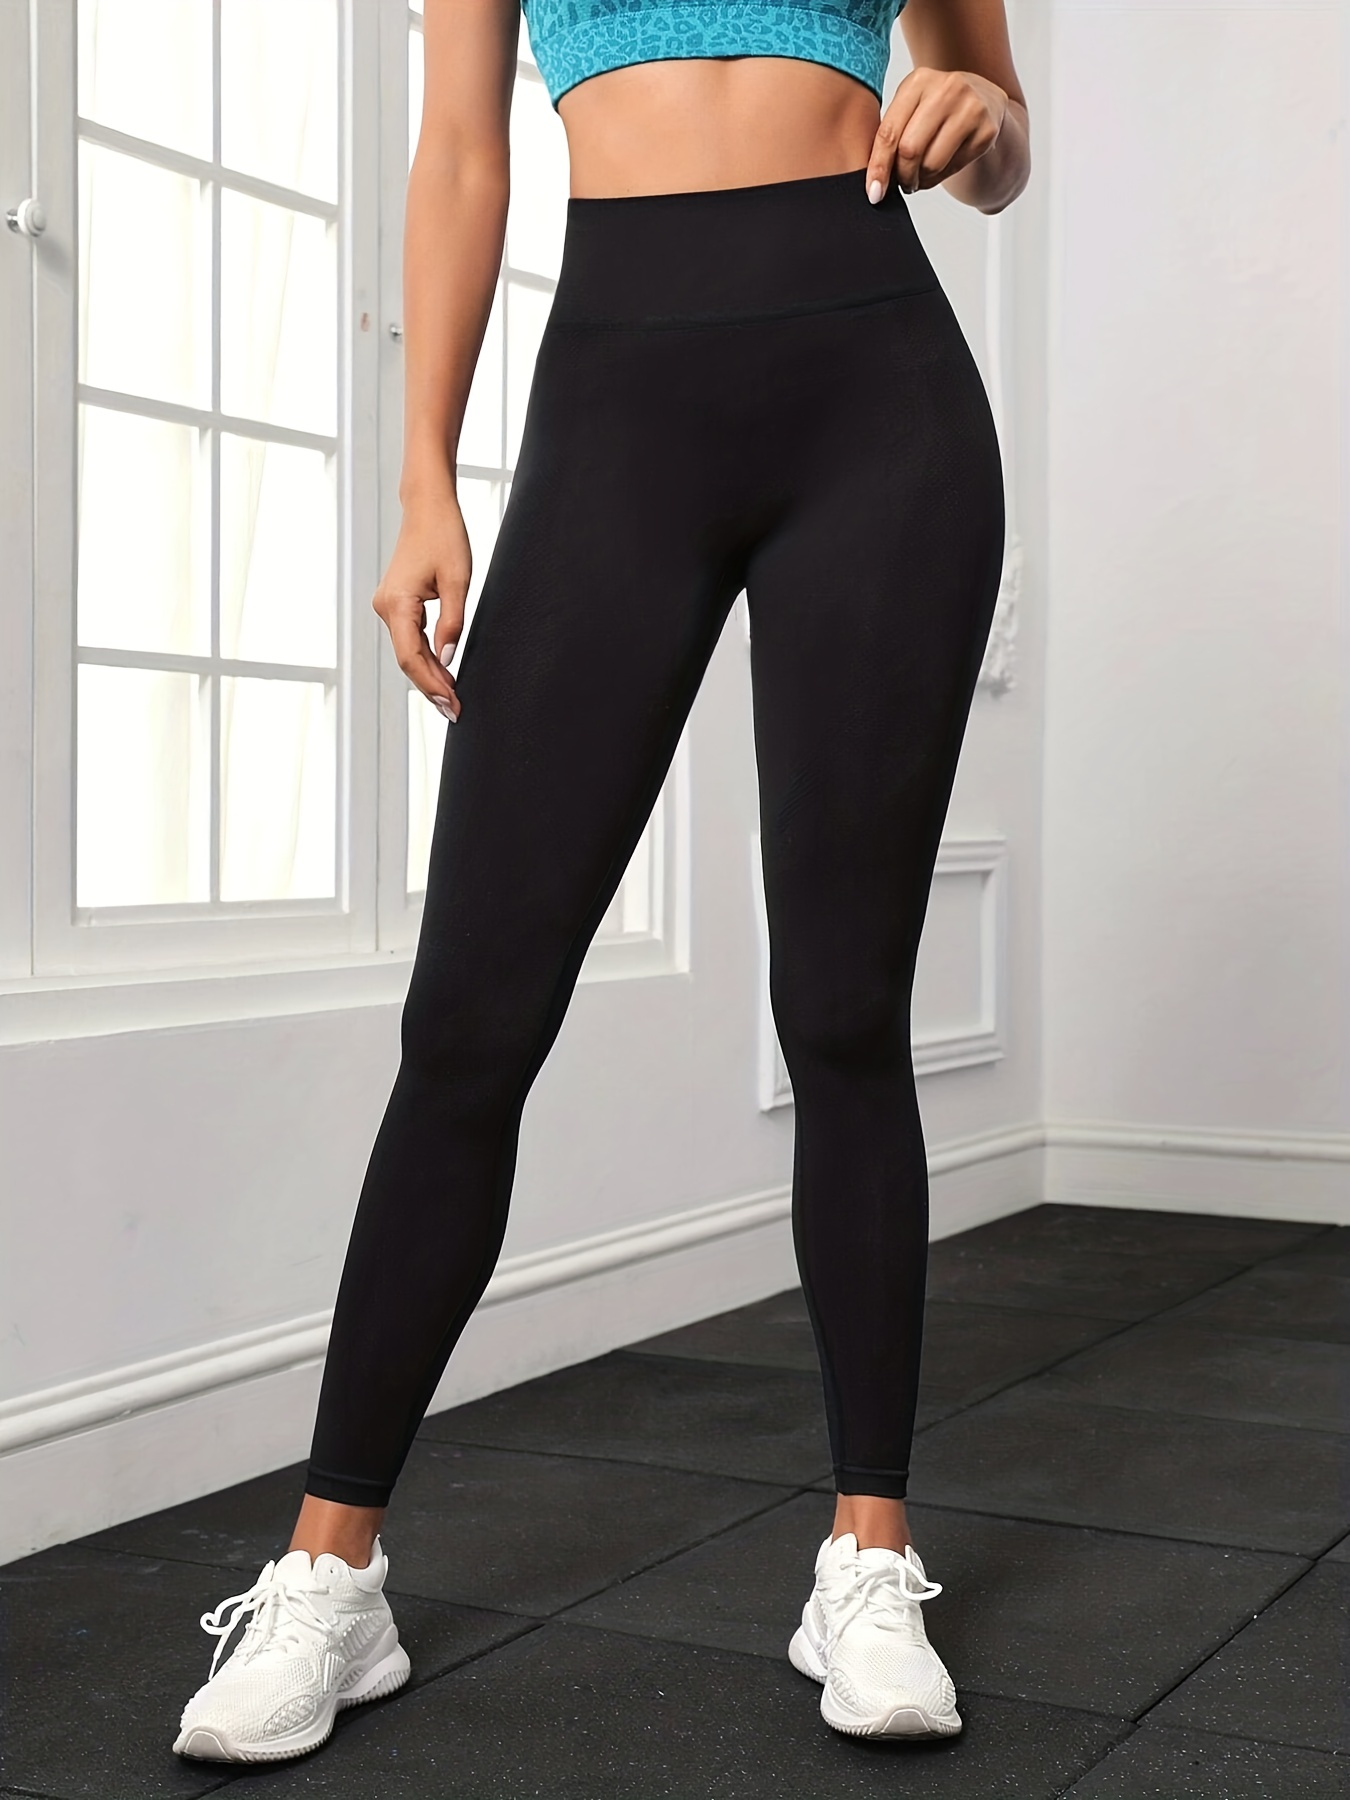 Sexy & Stylish Black High Waist Yoga Leggings With Pocket - Perfect Fit for  Women!